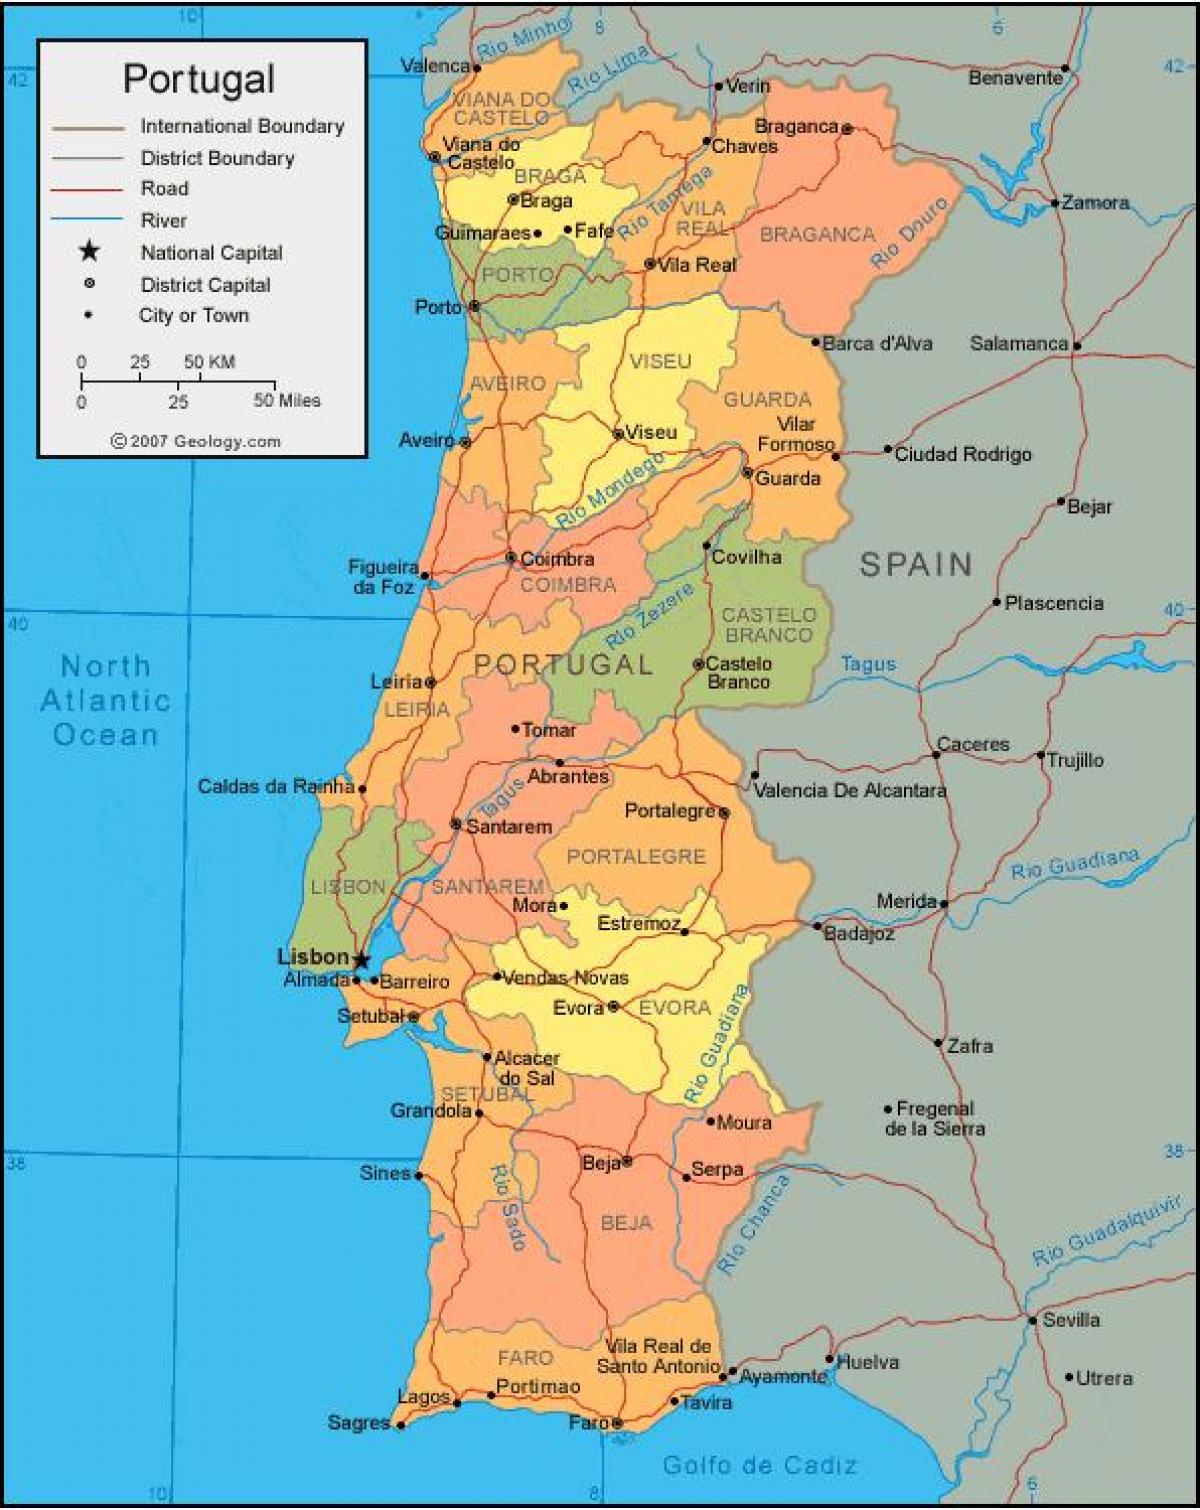 Portugal on map - Portuguese map (Southern Europe - Europe)